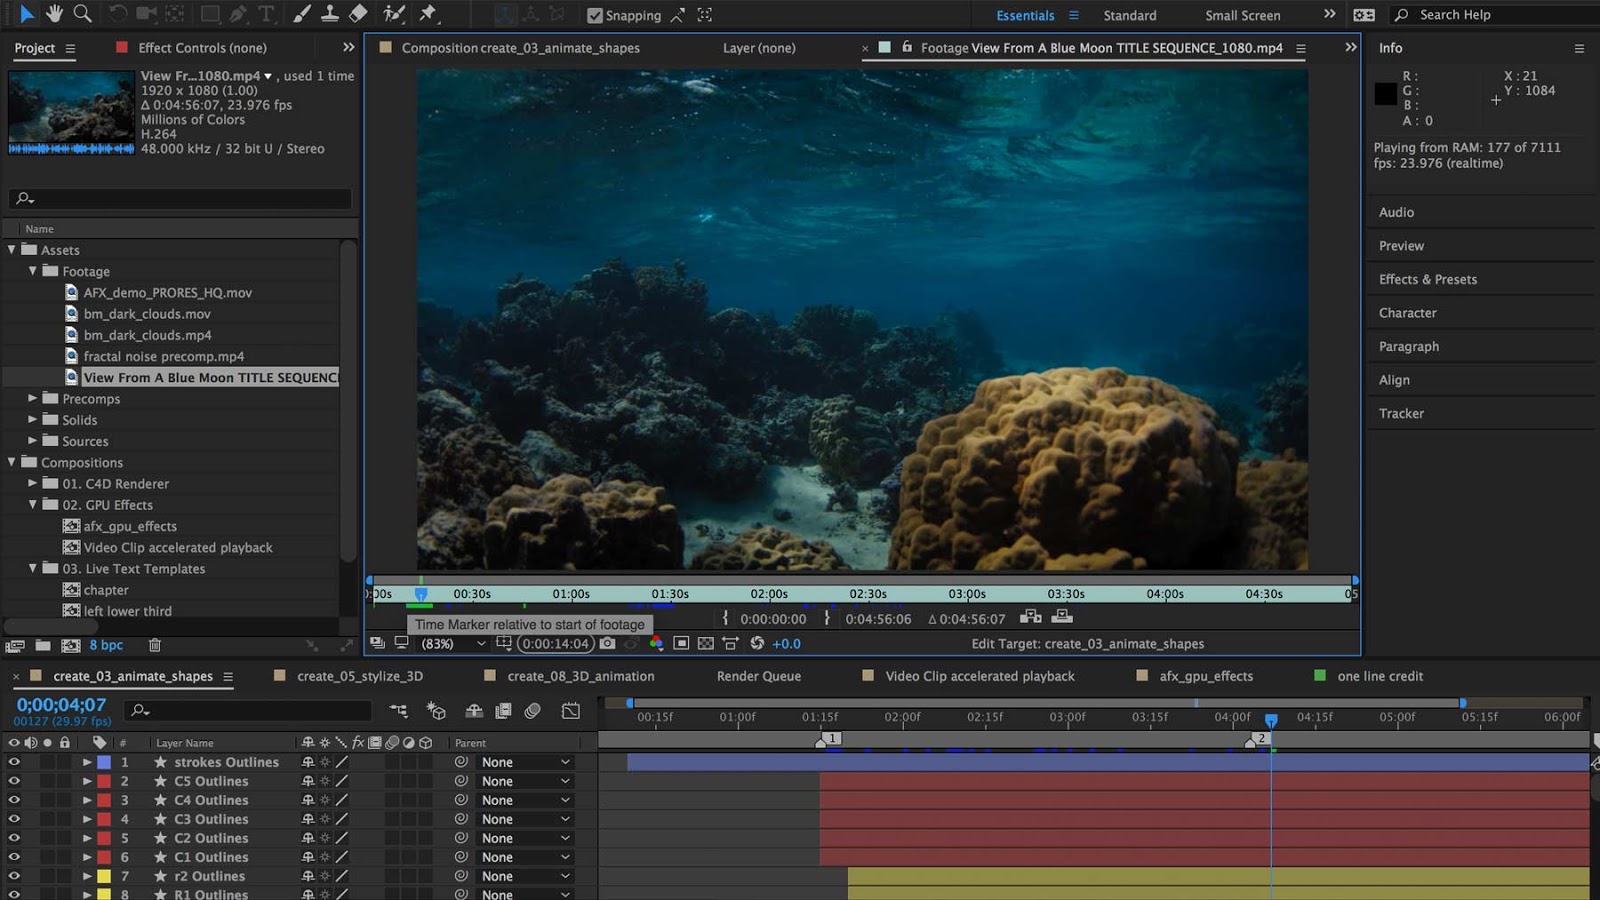 after effects cc 2017 14.2 free download torrent